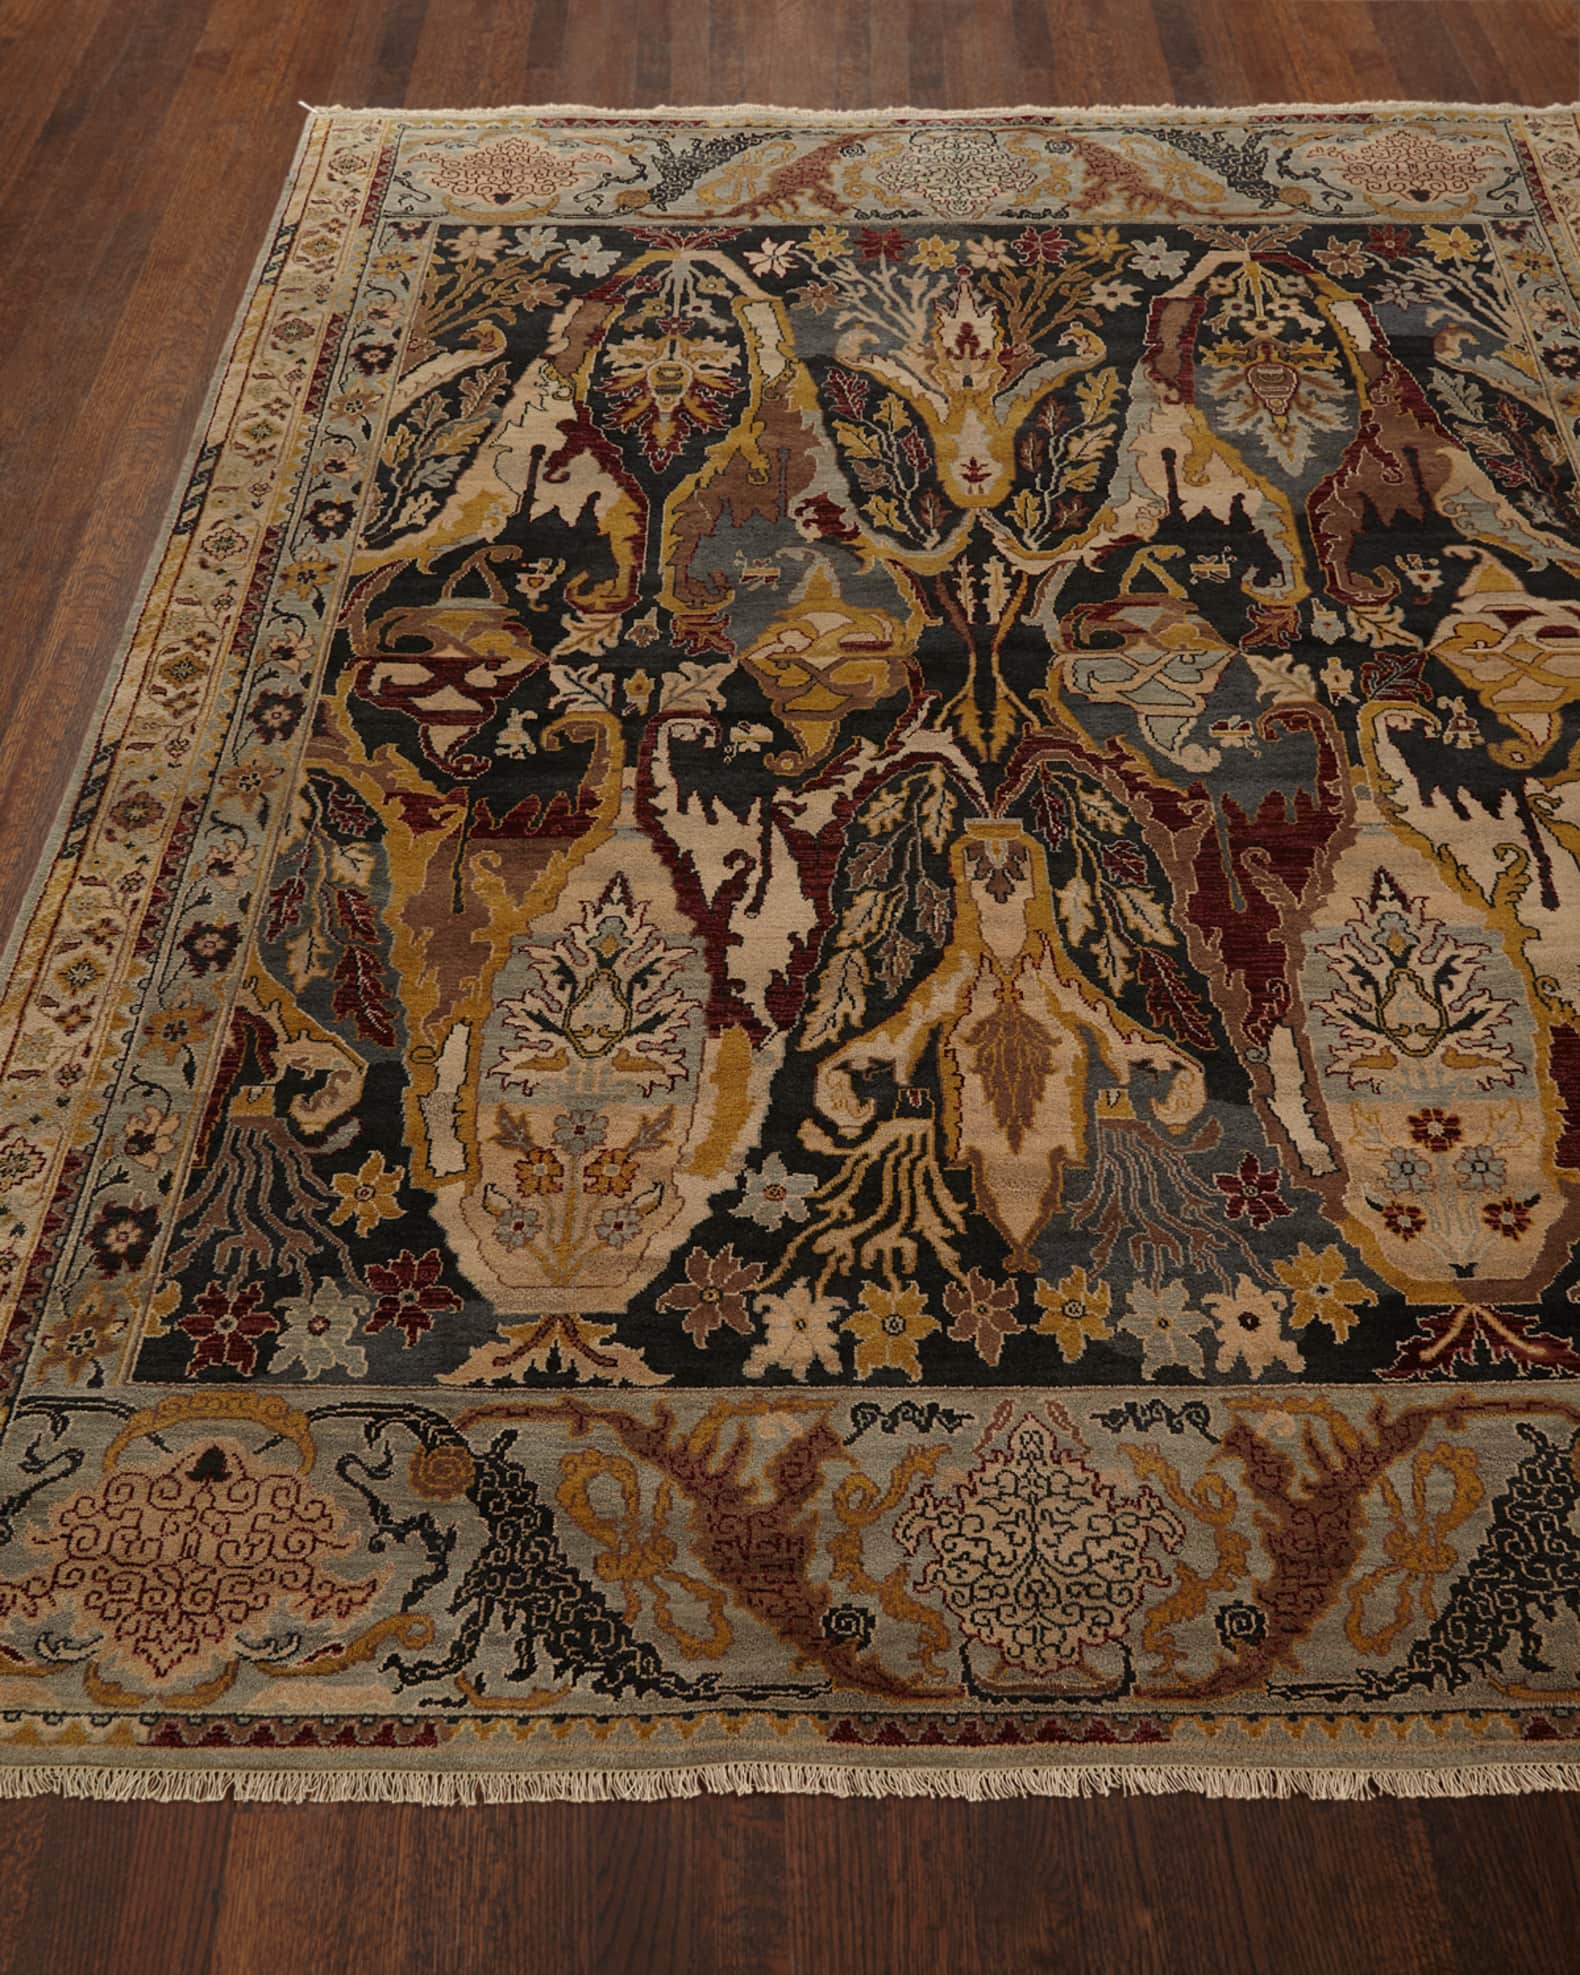 Exquisite Rugs Hamilton Hand-Knotted Rug, 10' x 14'